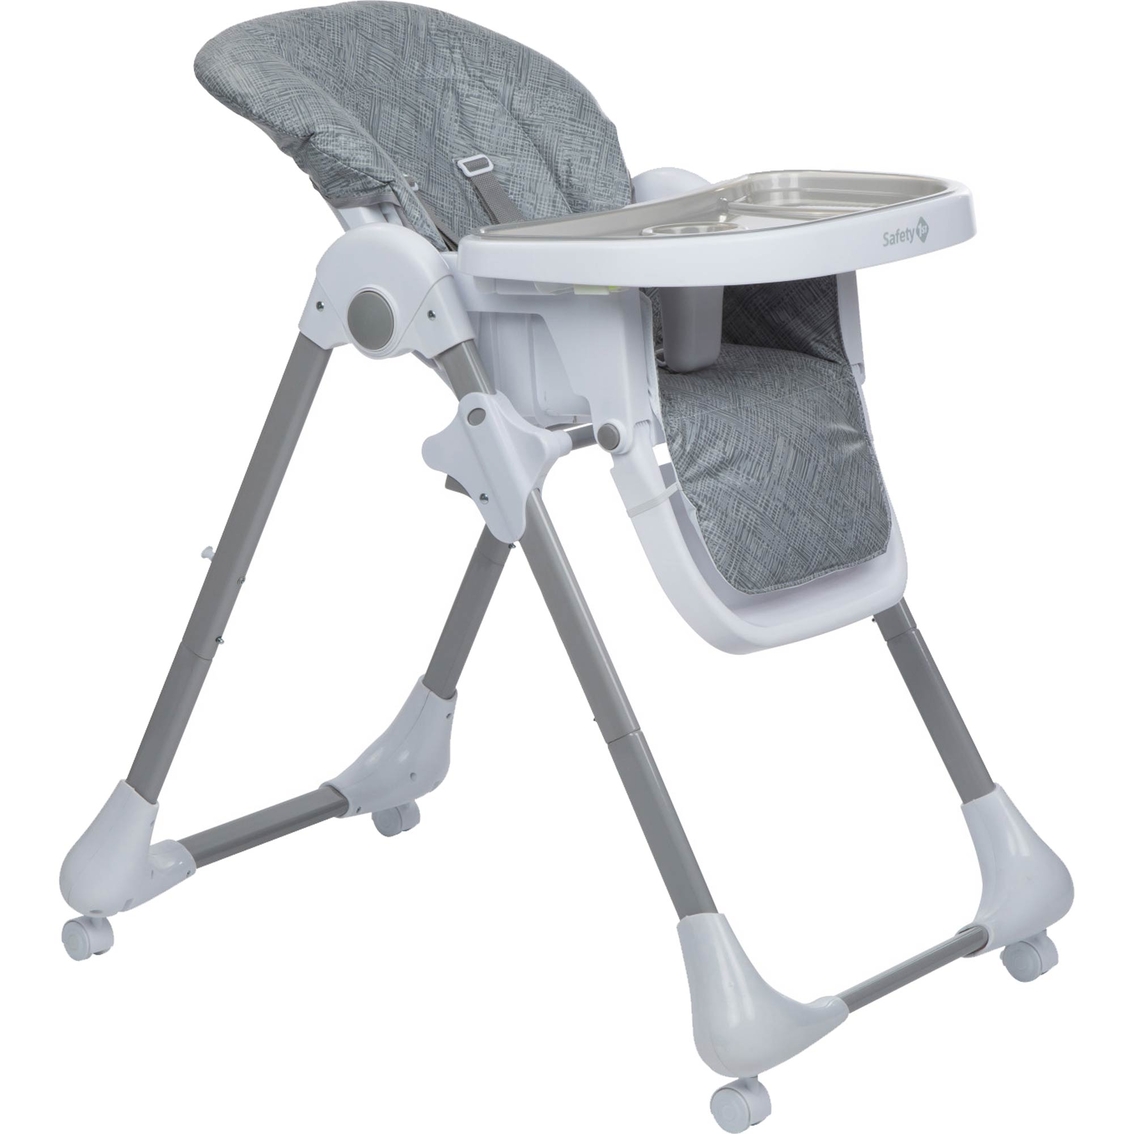 Safety 1st 3-in-1 Grow and Go High Chair - Image 9 of 10